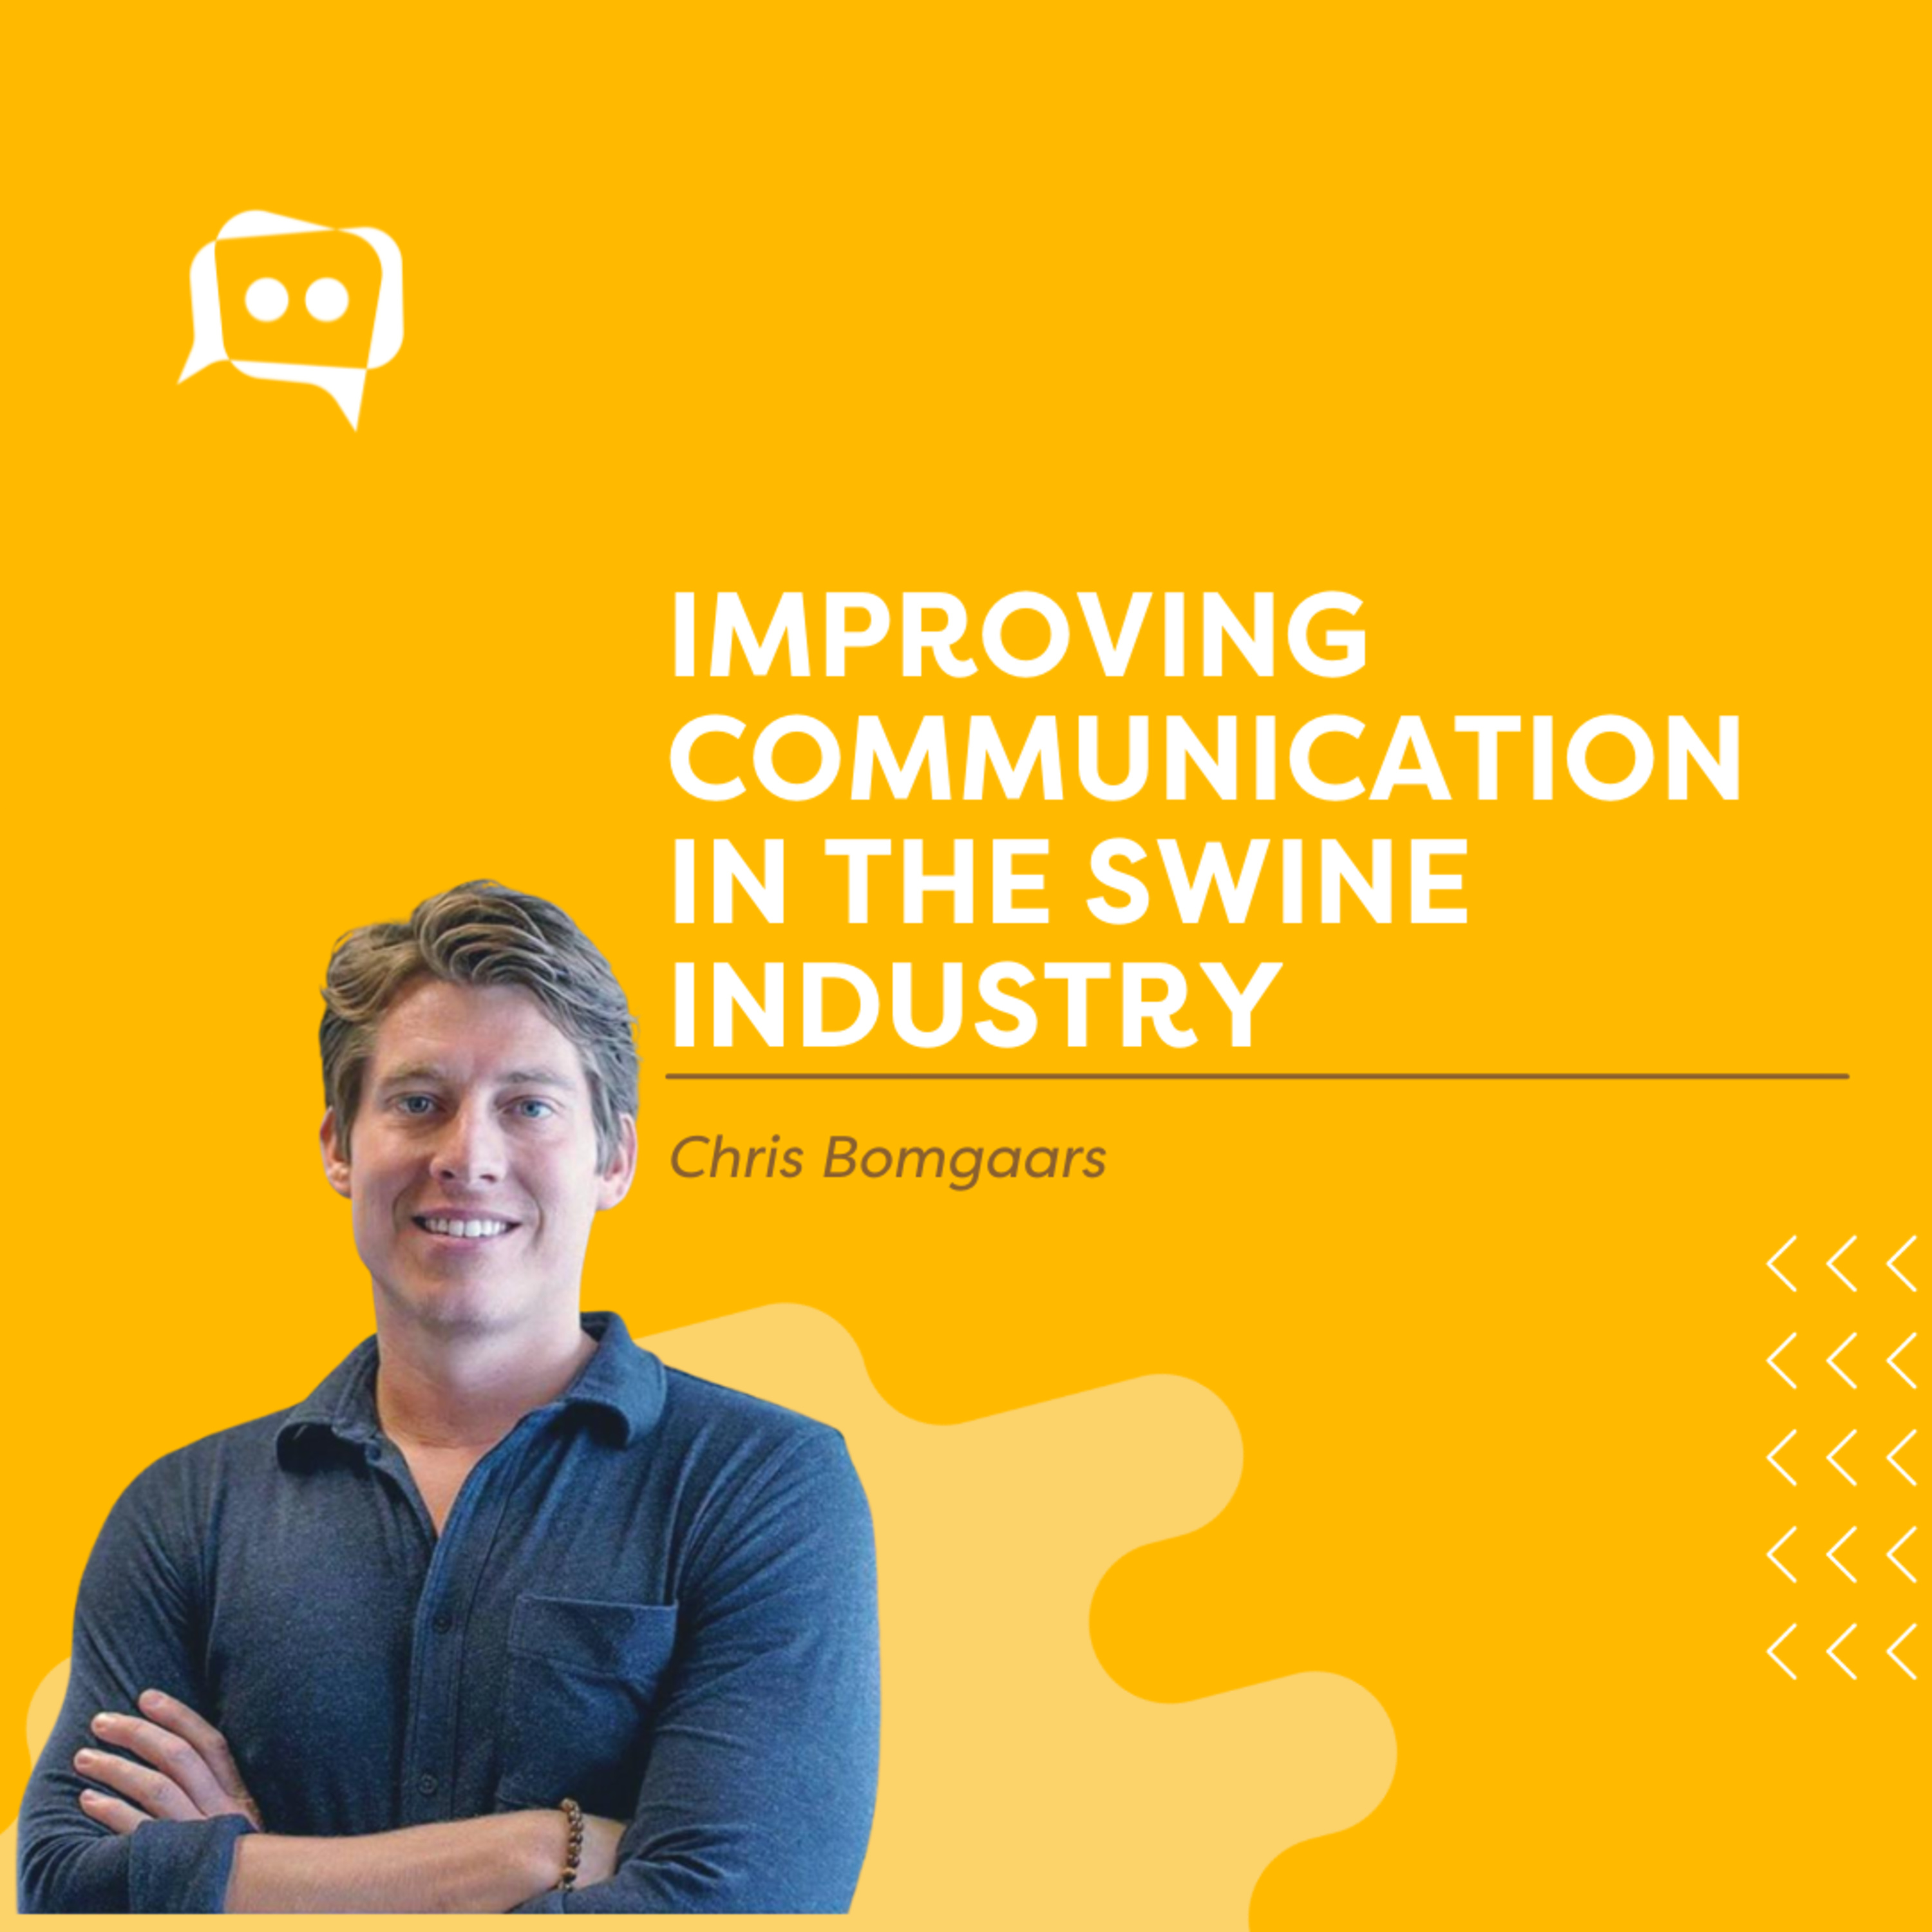 #SHORTS: Improving communication in the swine industry, with Chris Bomgaars